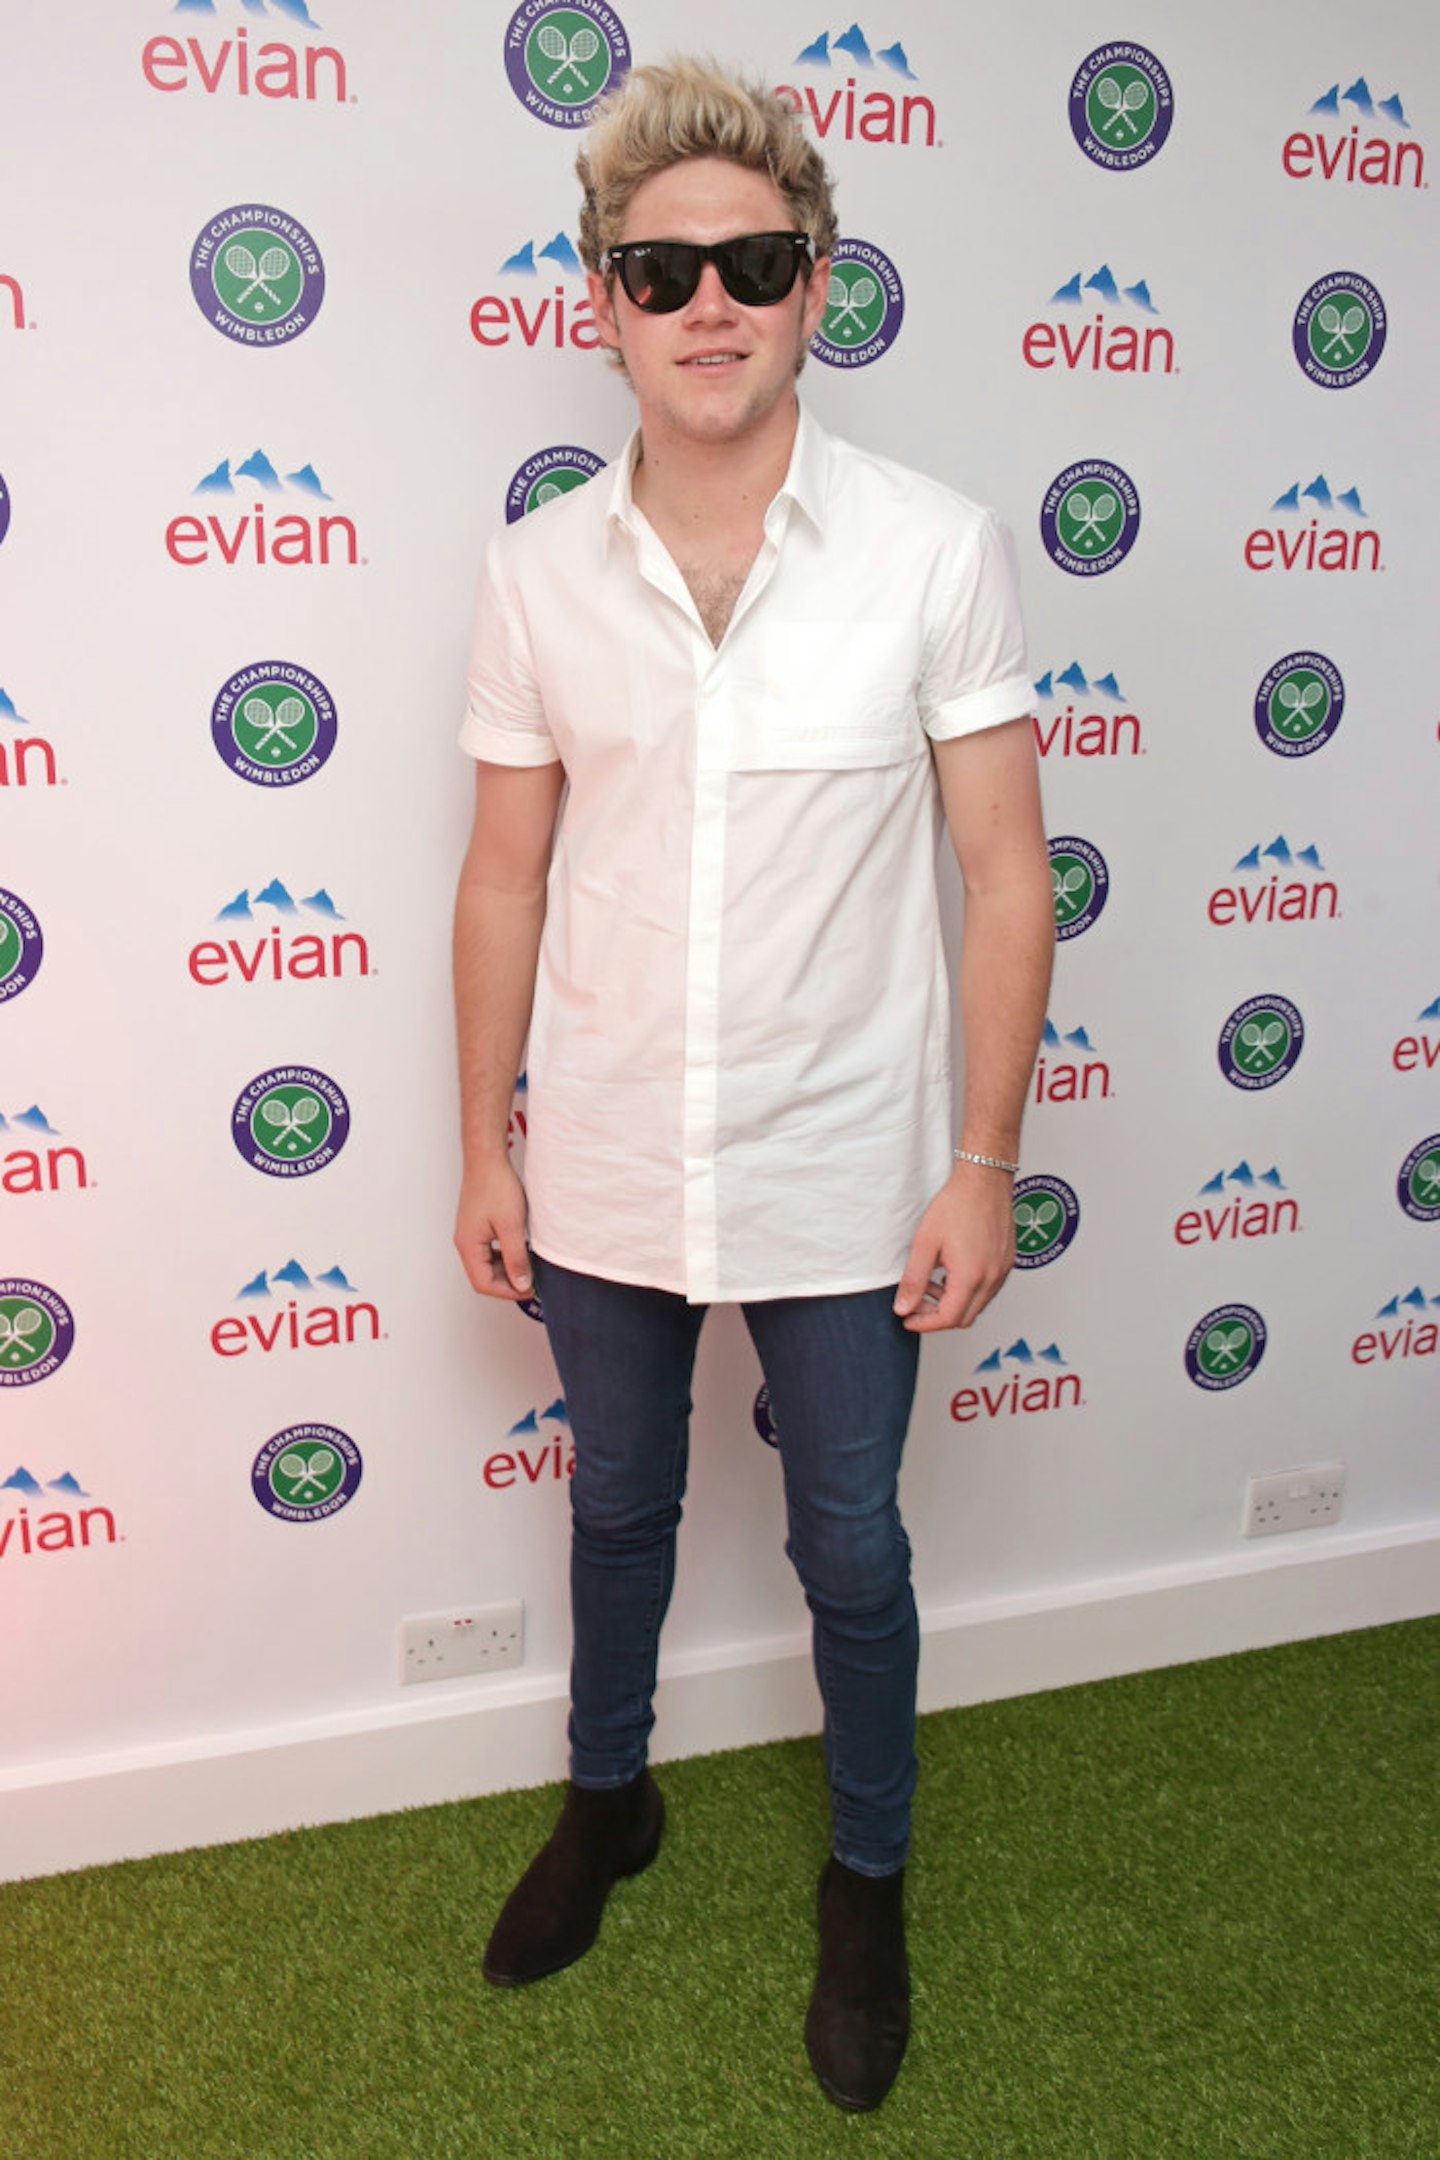 Niall Horan at the evian Live young Suite 2015